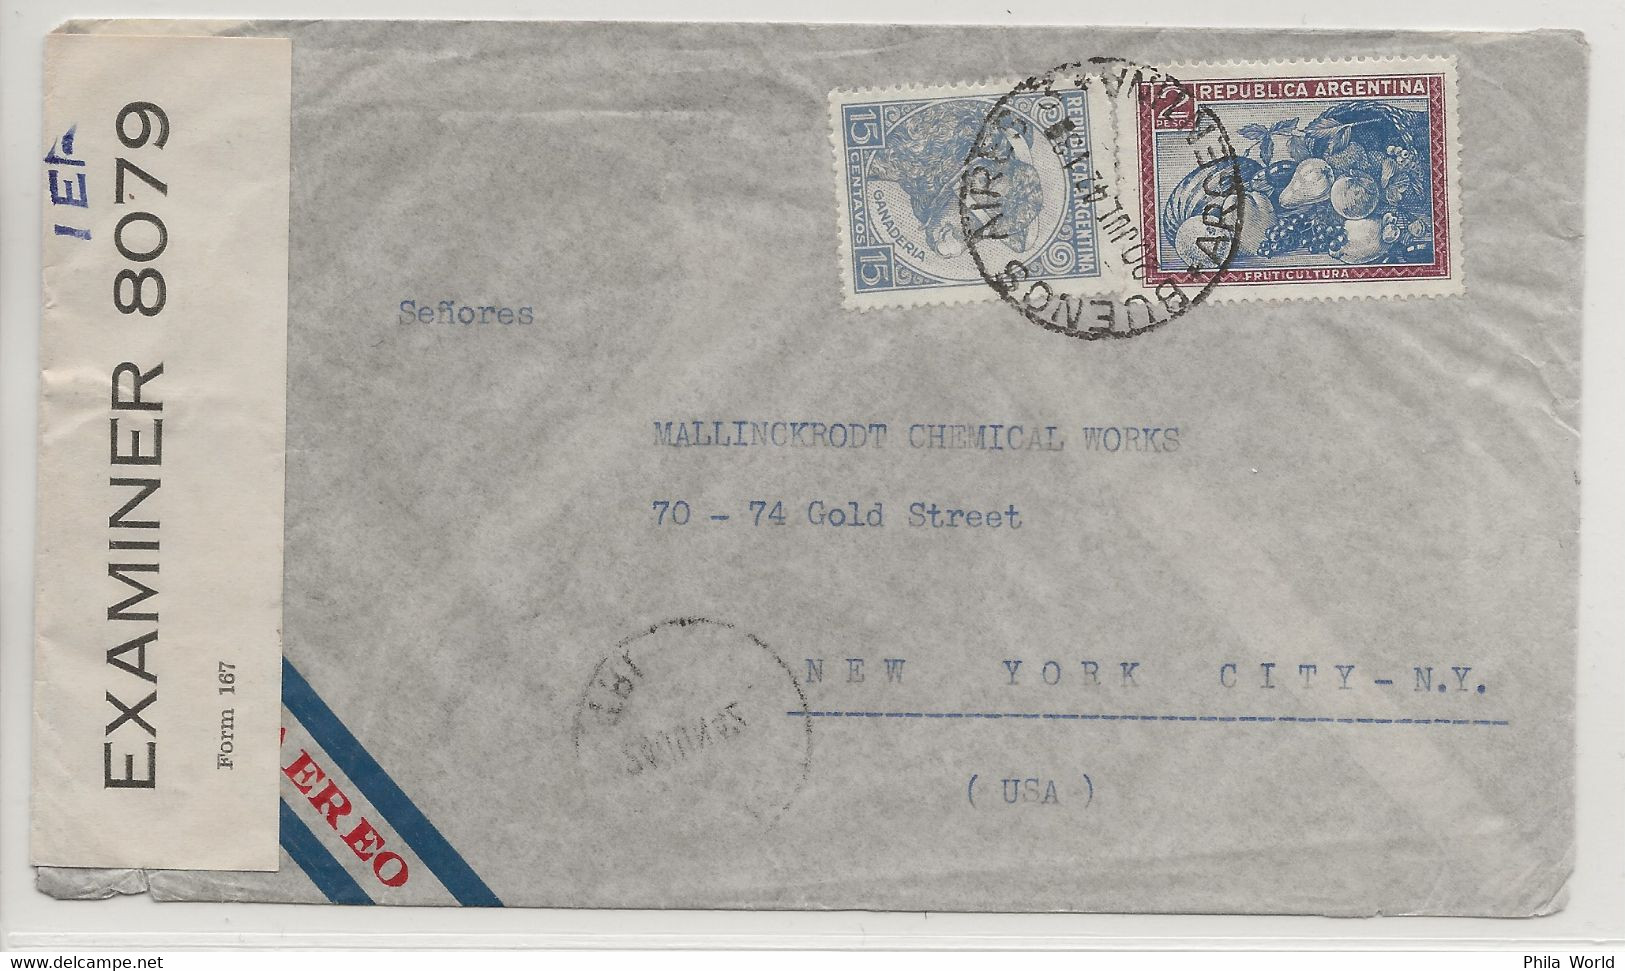 ARGENTINA WW2 1942 Buenos Aires Air Mail Cover > USA TRINIDAD Censortape EXAMINED 8079 - Covers & Documents